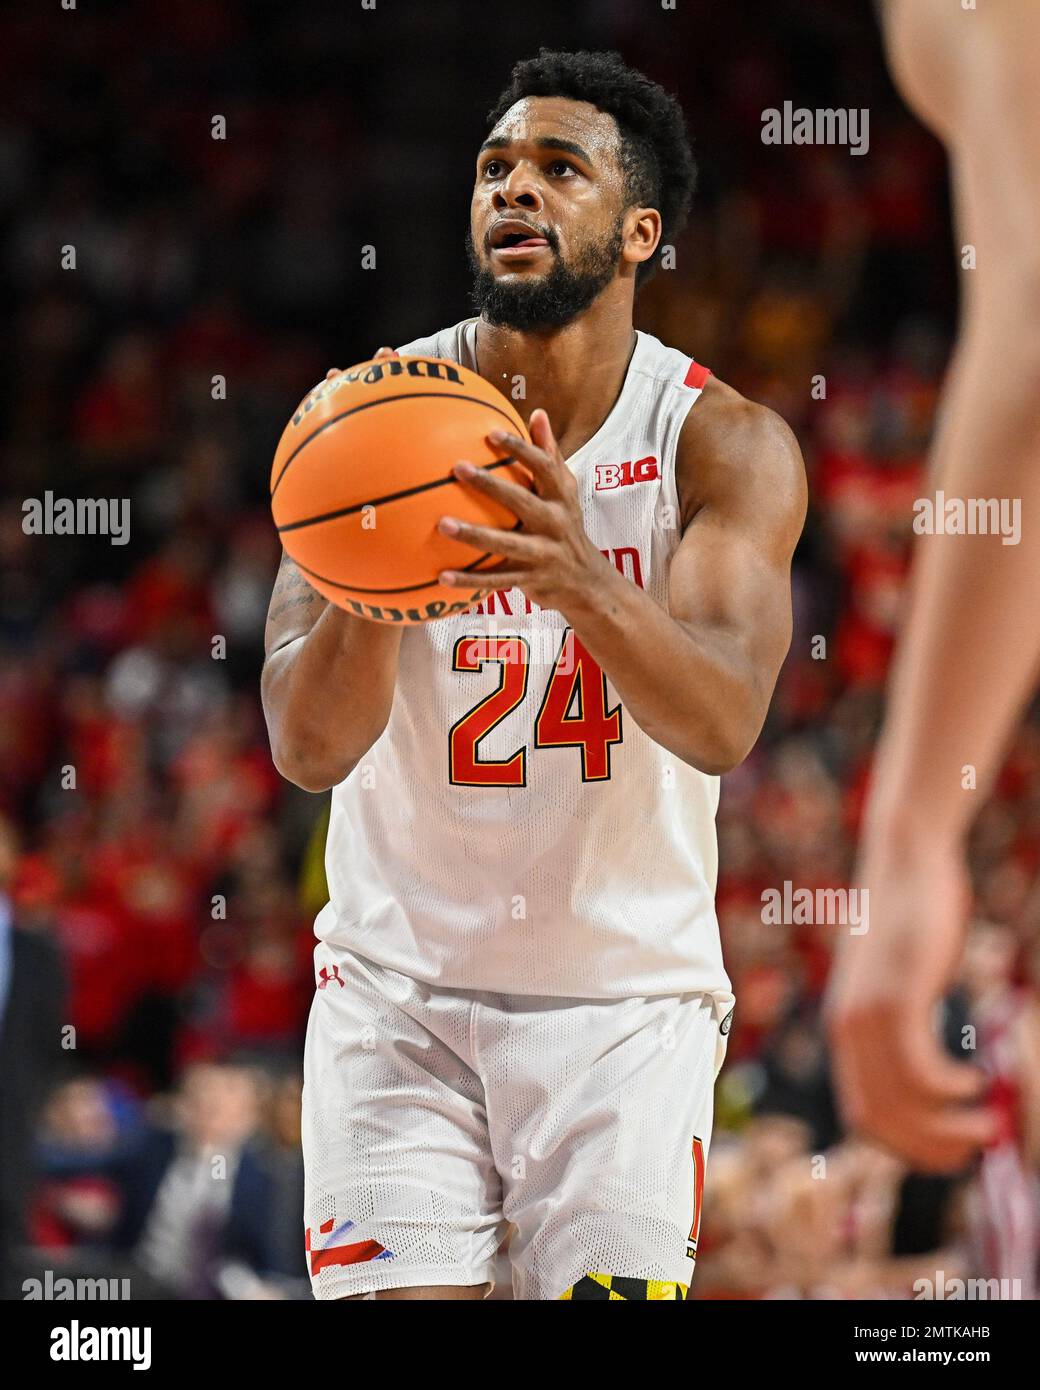 College Park, MD, USA. 31st Jan, 2023. Maryland Terrapins forward Donta Scott (24) shots a free throw during the NCAA basketball game between the Indiana Hoosiers and the Maryland Terrapins at Xfinity Center in College Park, MD. Reggie Hildred/CSM/Alamy Live News Stock Photo